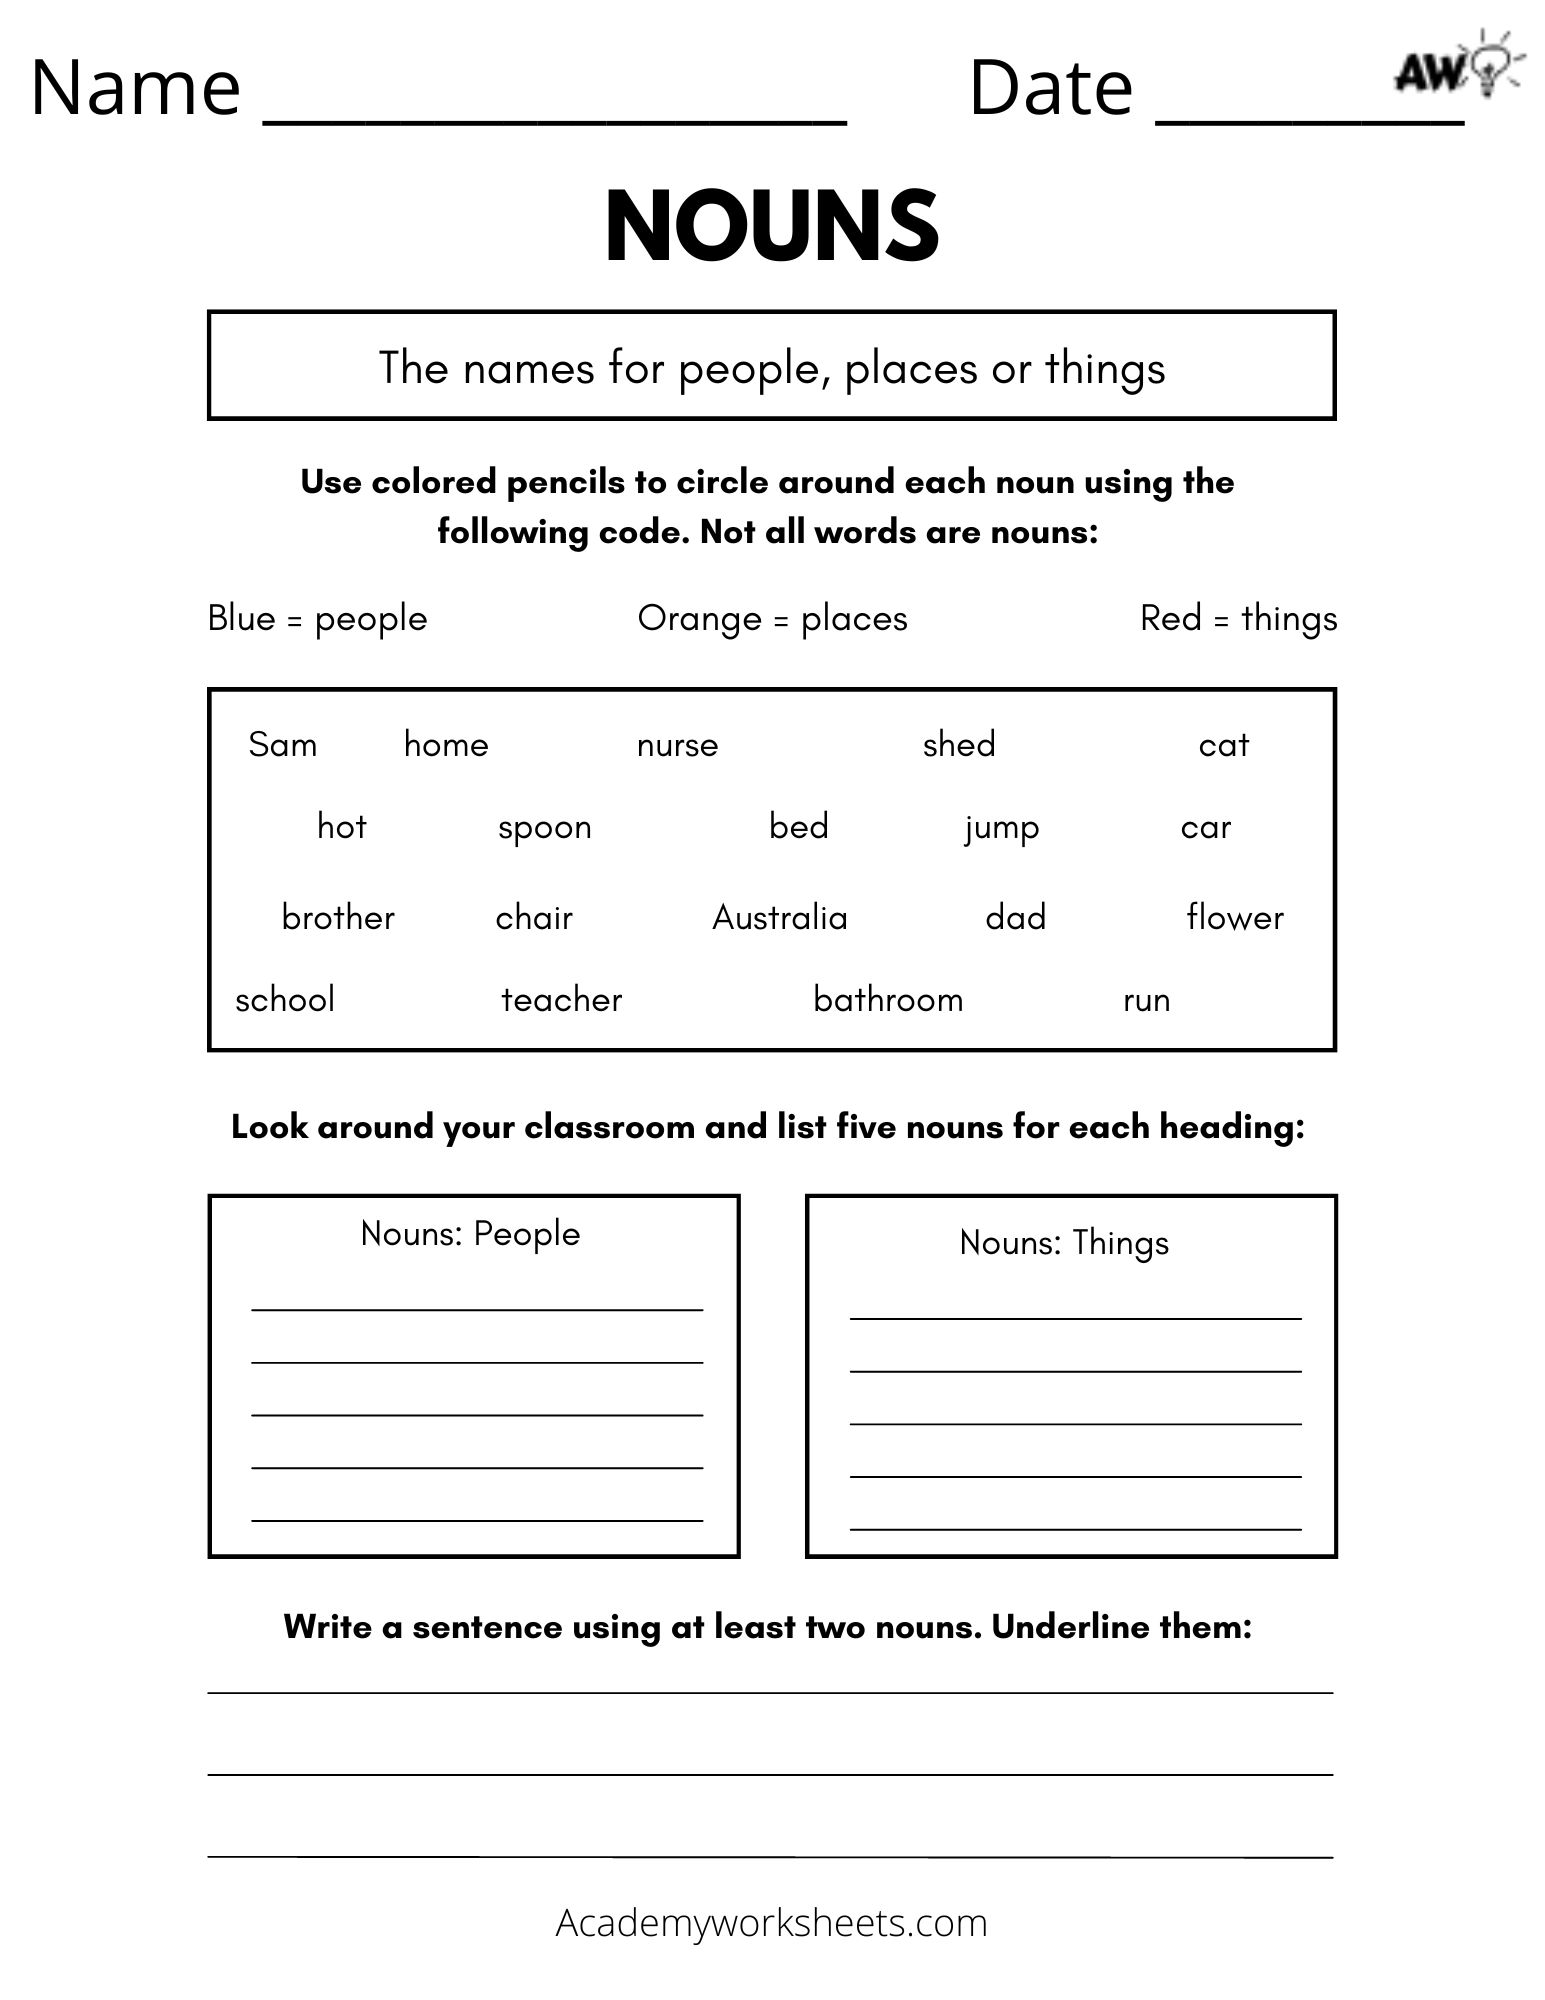 what-is-a-noun-worksheets-academy-worksheets